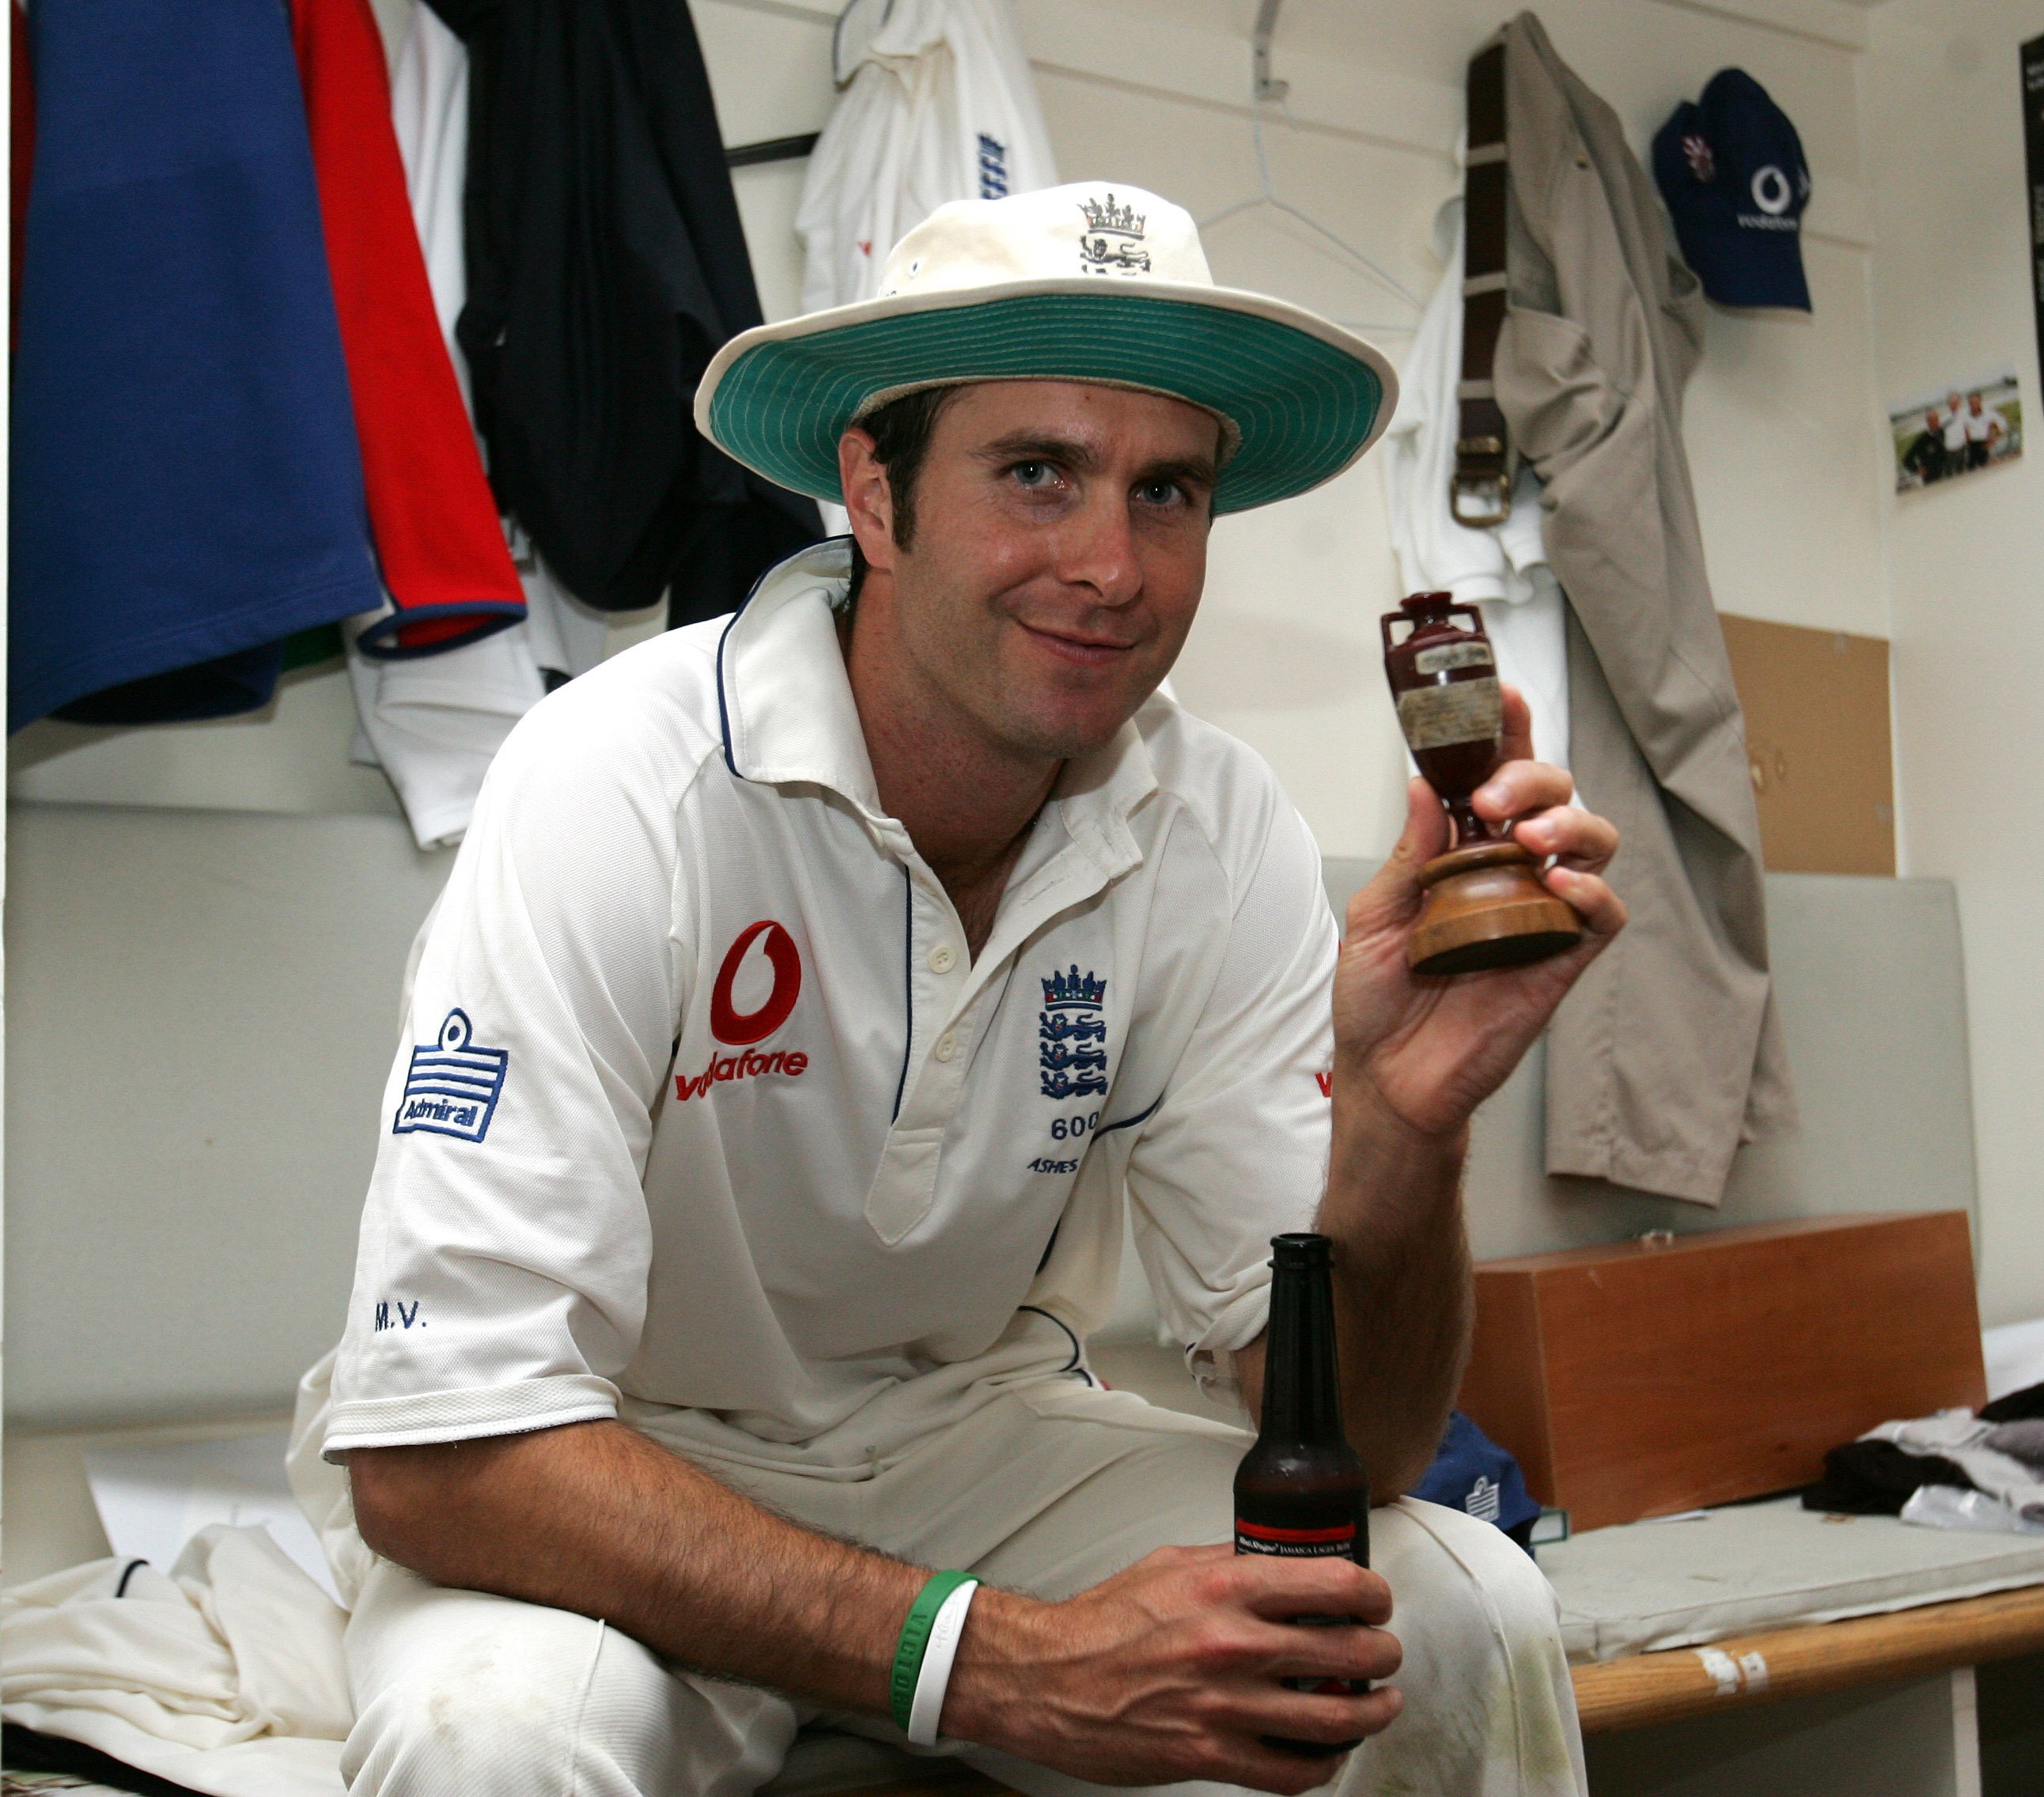 England V Australia / 5th Ashes Test / The Oval 12/09/2005 Picture by Marc Aspland Michael Vaughan in the dressing room with the Ashes